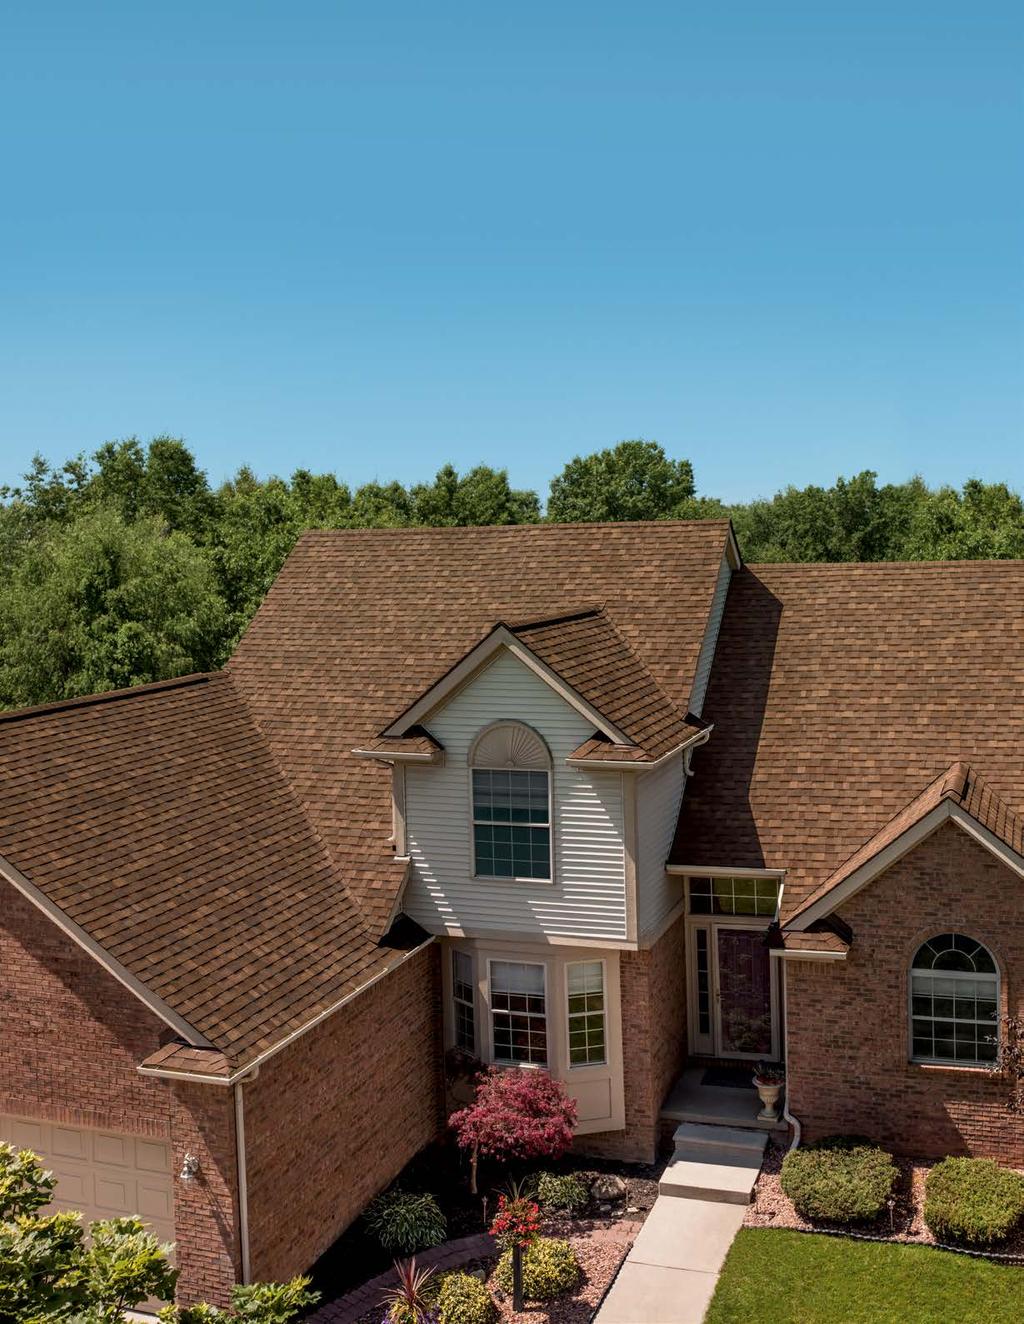 At Owens Corning Roofing, we re always looking for ways to help you express your sense of style through your home, which is why we ve expanded the Oakridge color palette with these inspiring